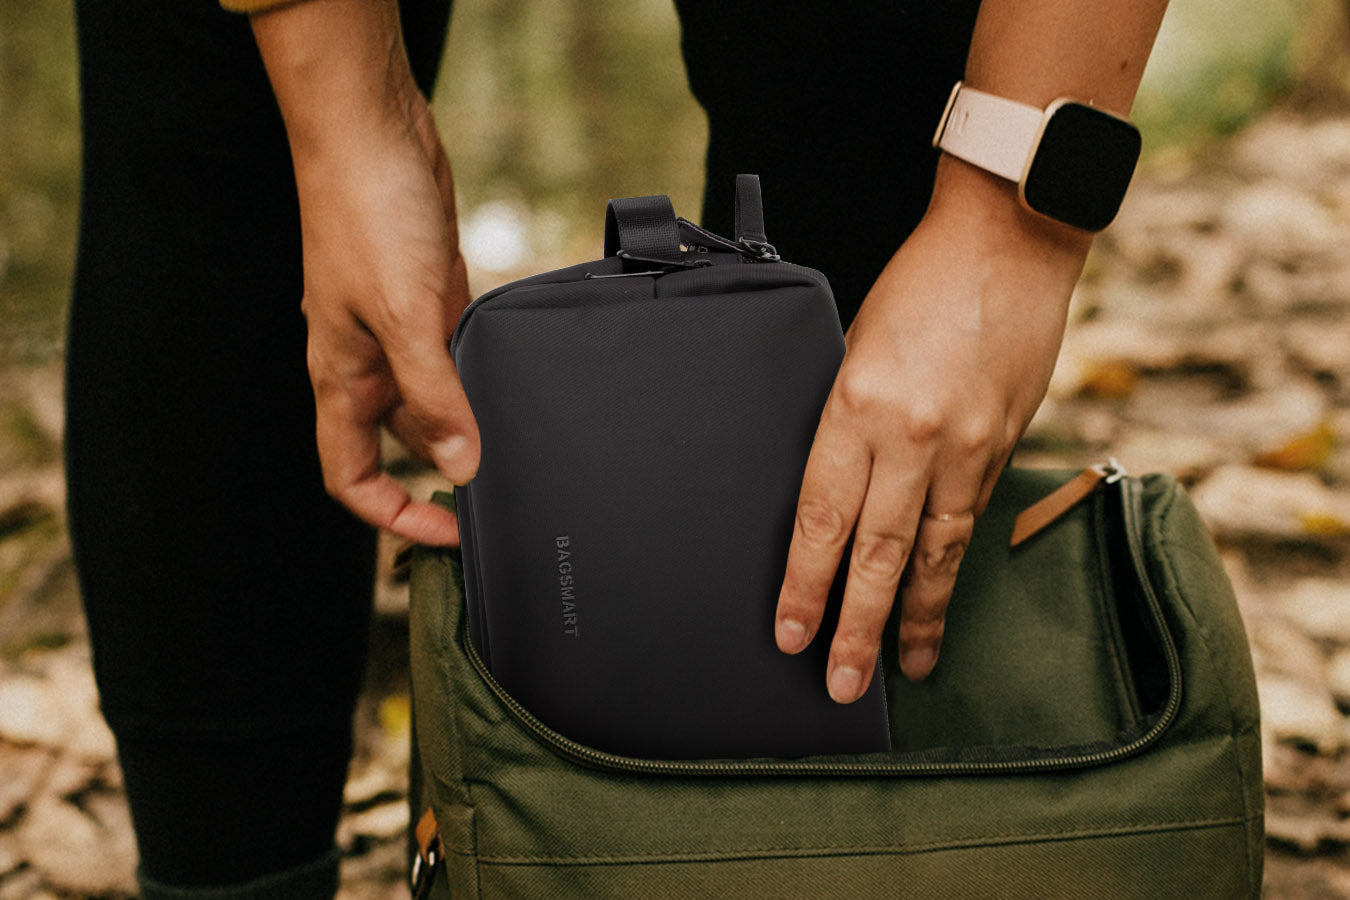  A thoughtfully designed BAGSMART Dopp kit keeps essentials organized and within reach.